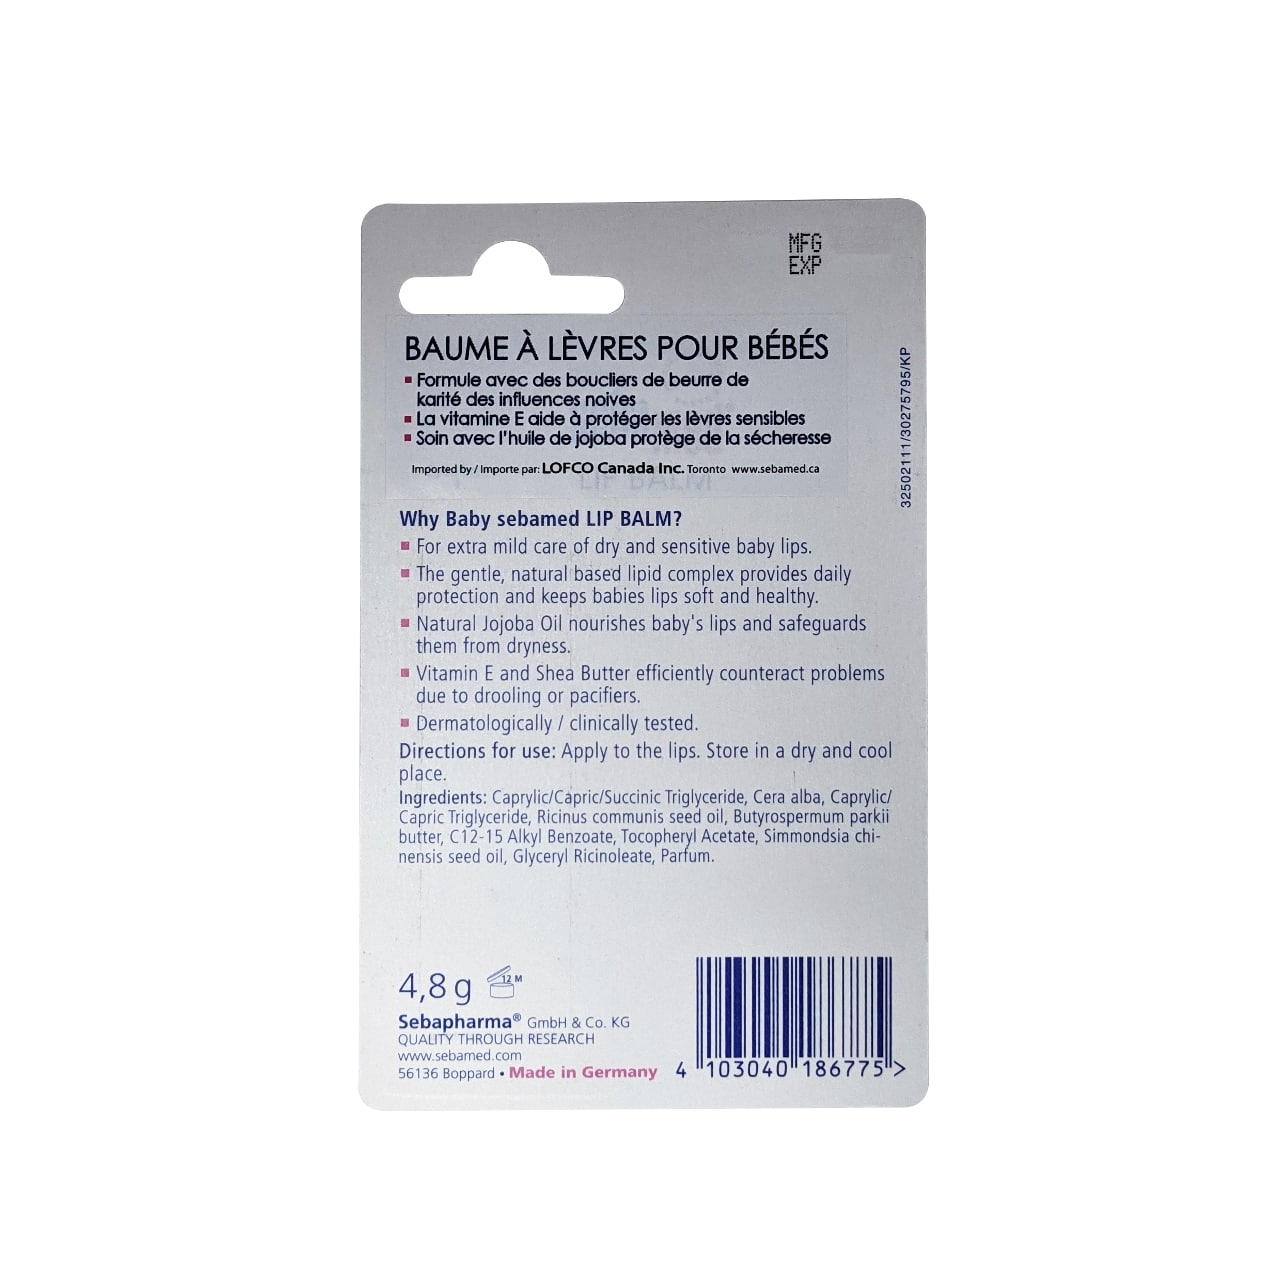 Baby Sebamed Lip Balm product info, directions, and ingredients